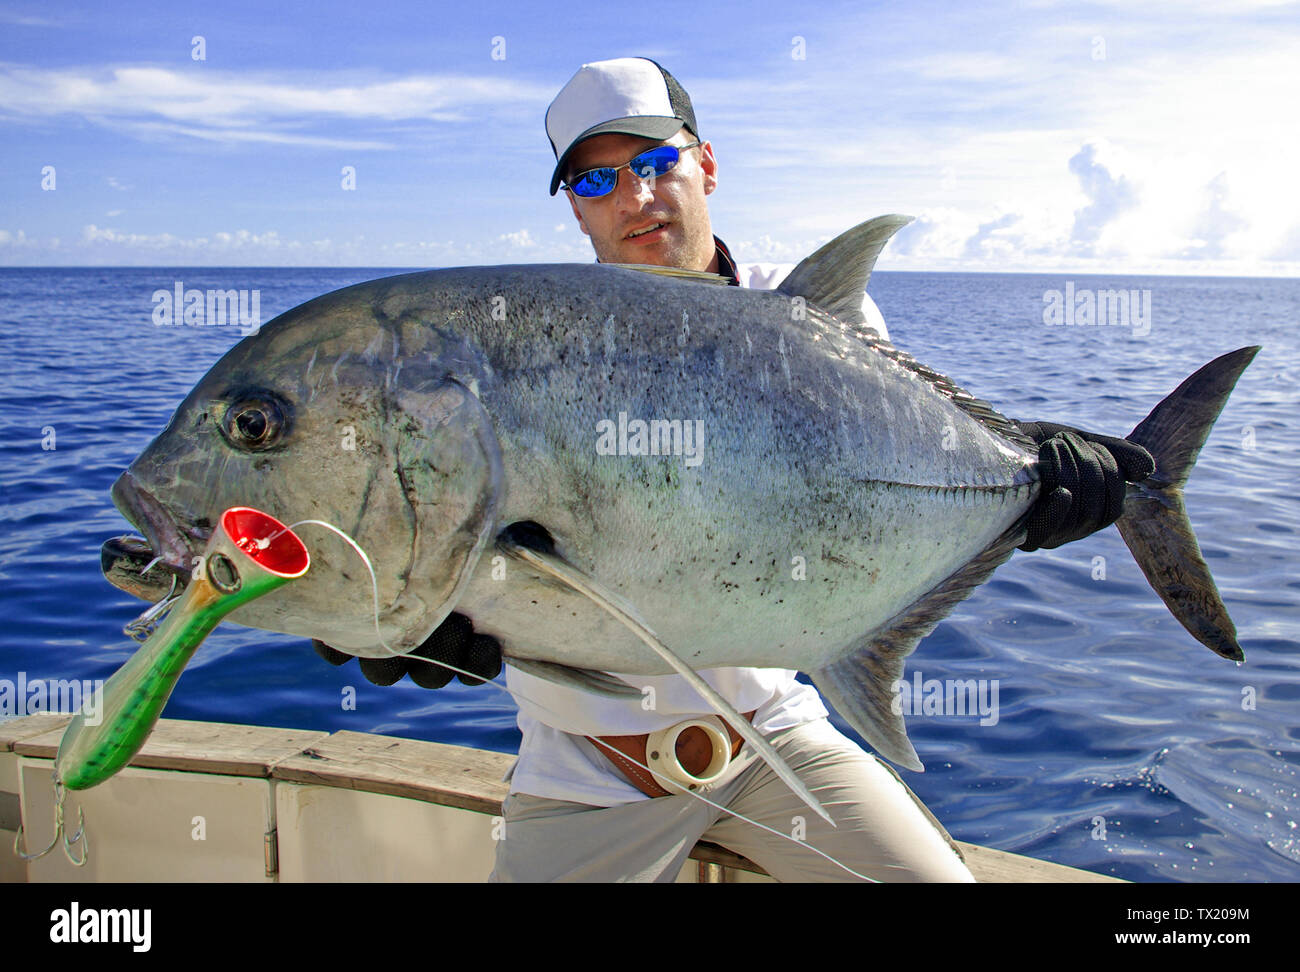 Deep sea fishing. Catch of fish. Big game fishing, boat fishing, lure fishing, sea fishing. Happy  fisherman holding a big Trevally jack Stock Photo